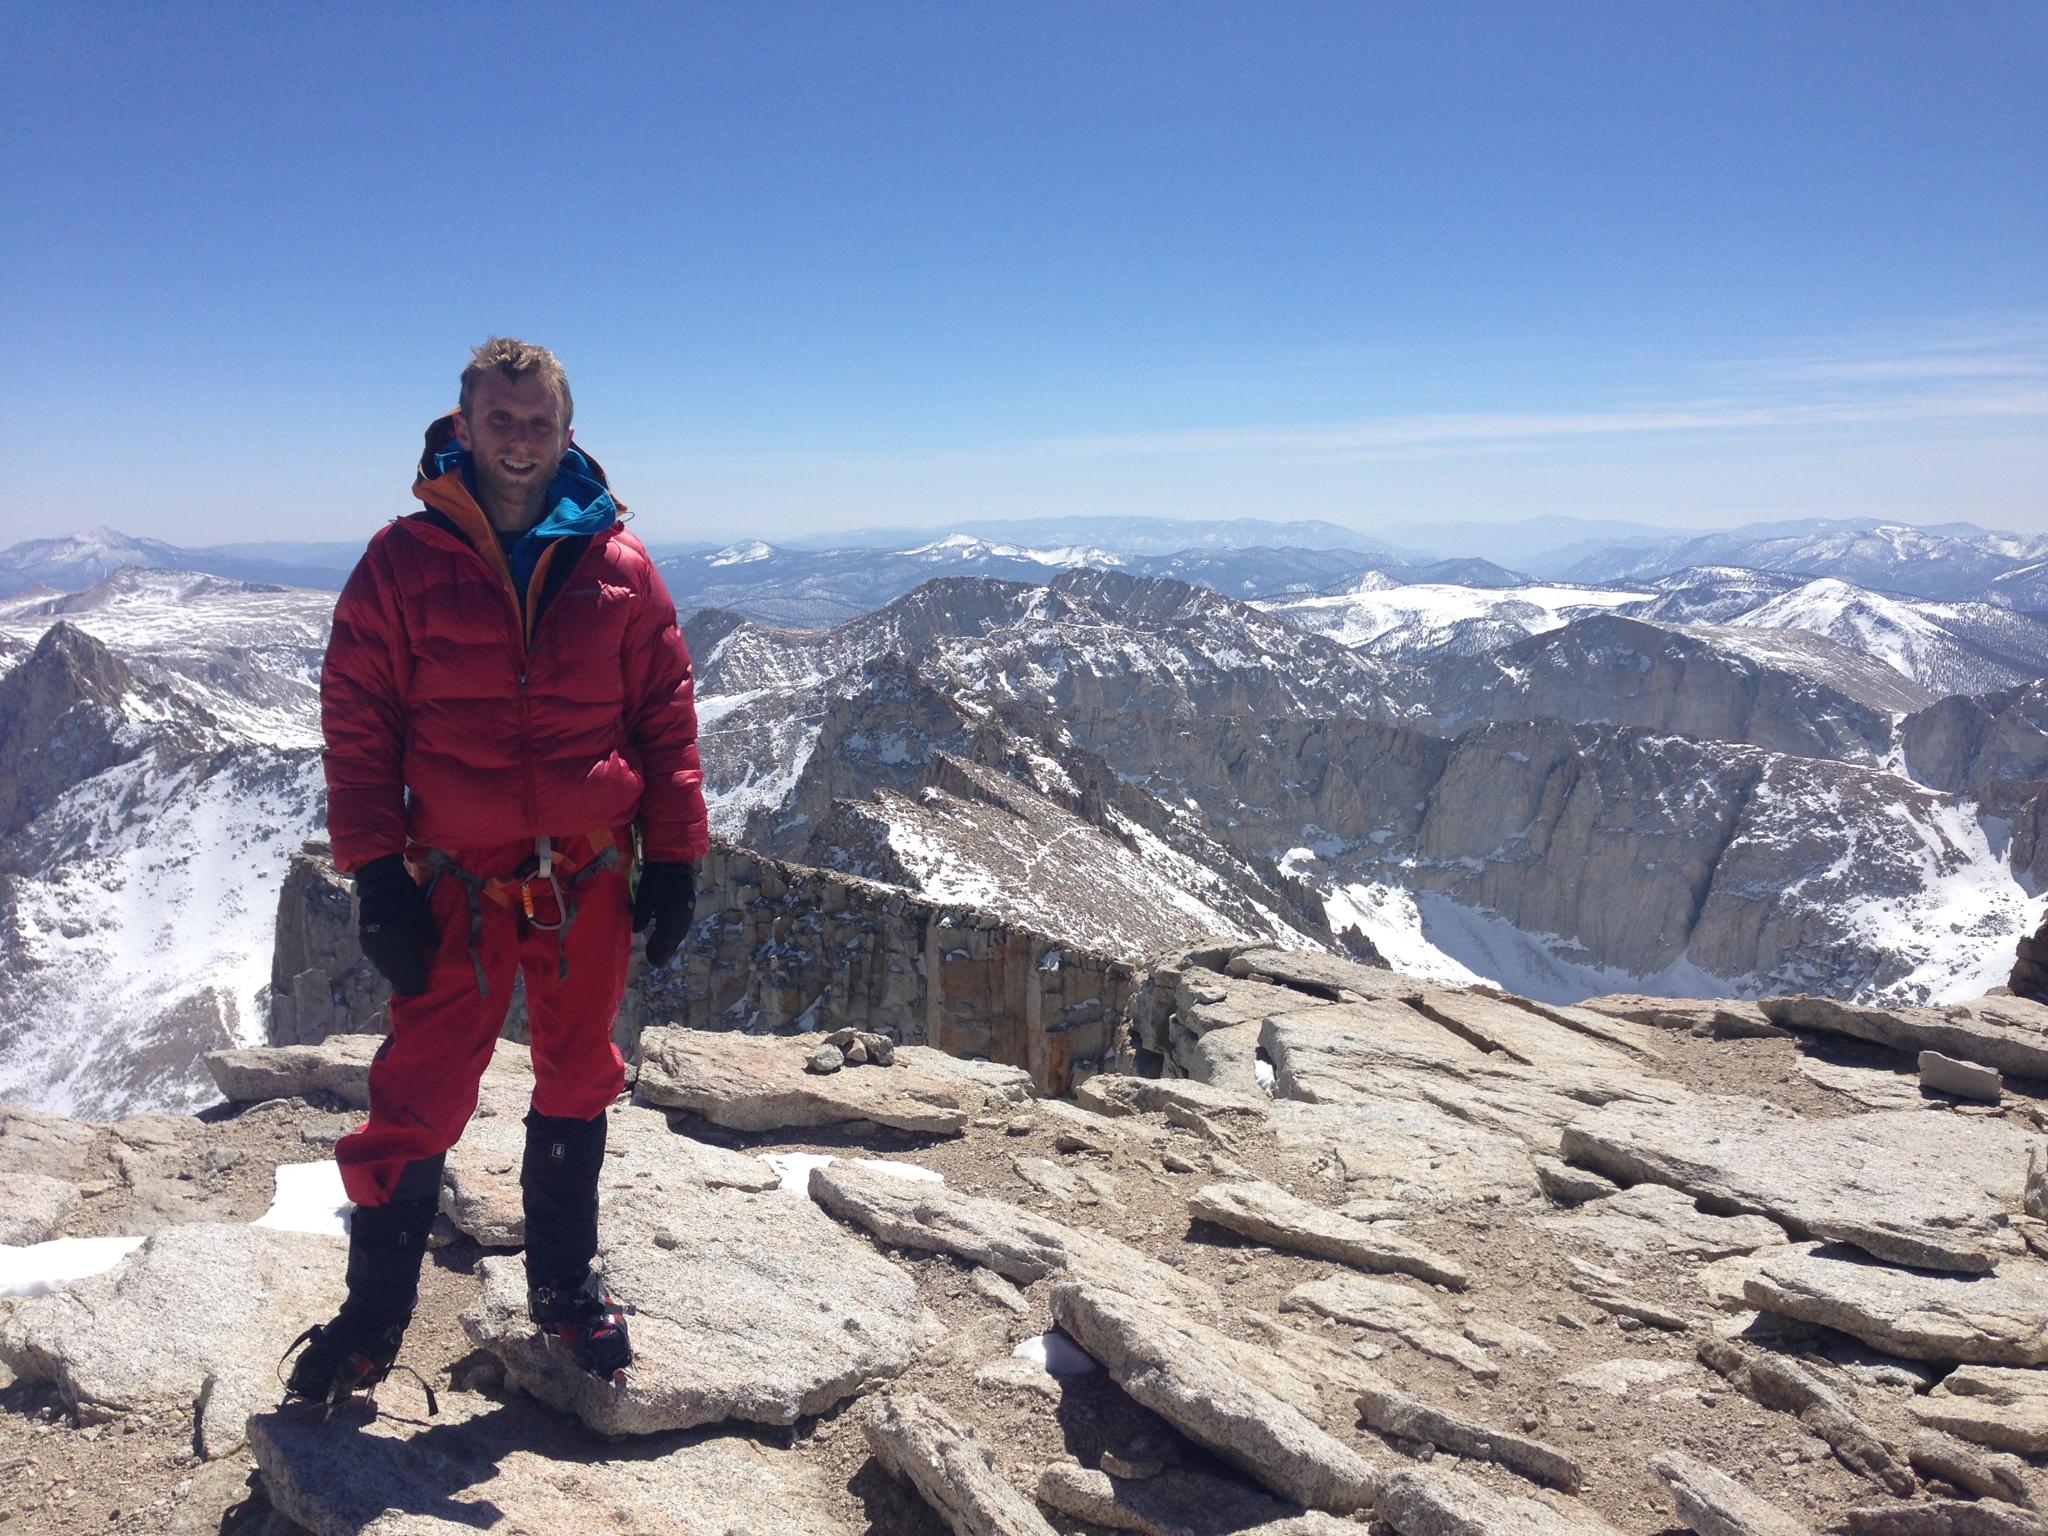 Trip Report: Mt. Whitney Mountaineer's Route March 22-24, 2013